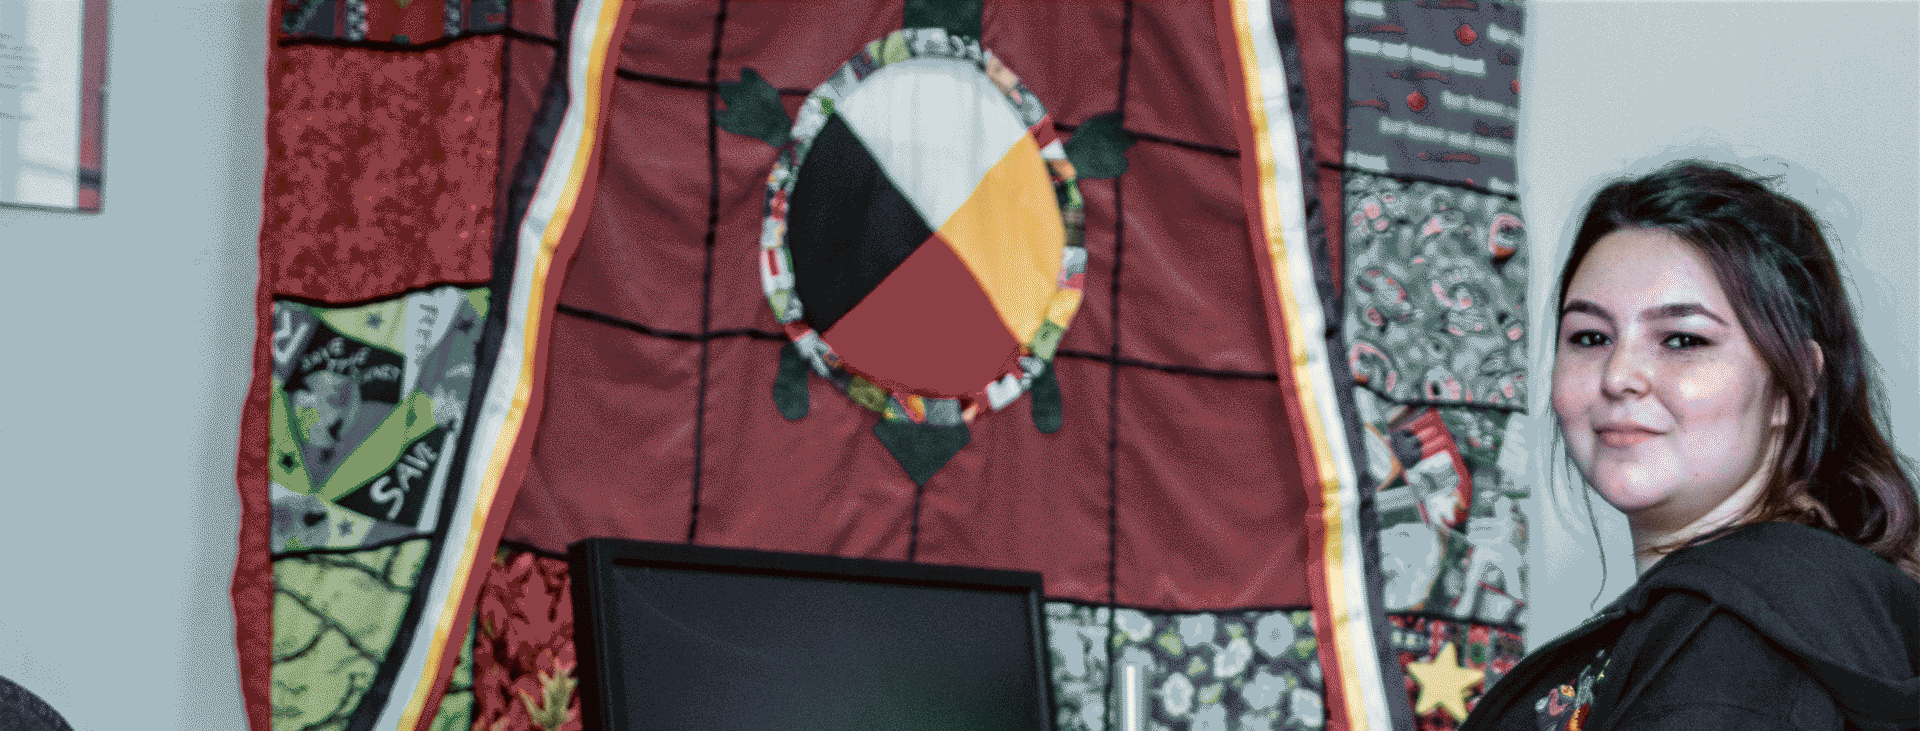 Indigenous student sitting at computer with wall quilt in background